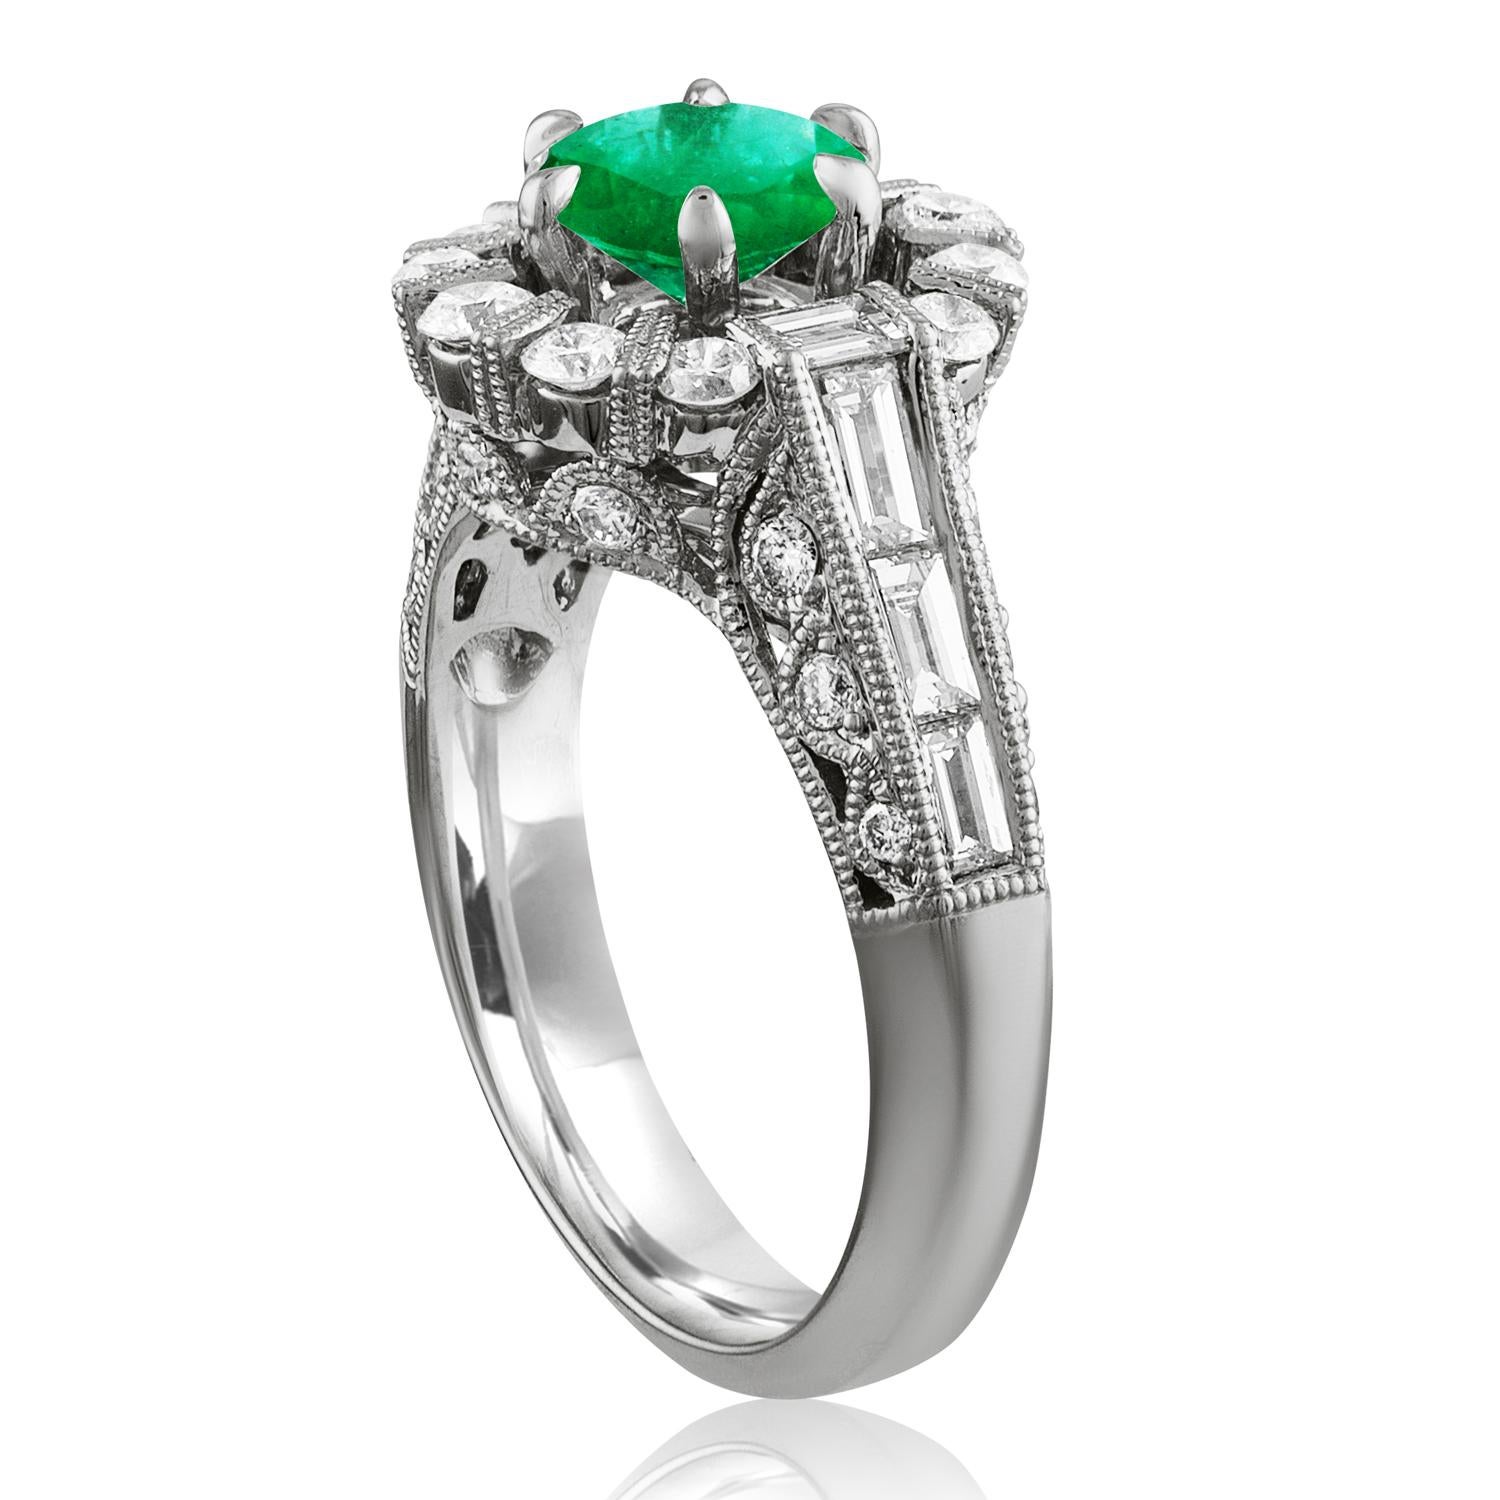 Beautiful Halo Emerald Milgrain Ring
The ring is 18K White Gold.
The Center is a beautiful round cut 1.48 Carat Emerald.
The Emerald is AGL certified.
There are 1.30 Carats in Diamonds F/G VS/SI
The ring is a size 6.50, sizable.
The ring weighs 6.6